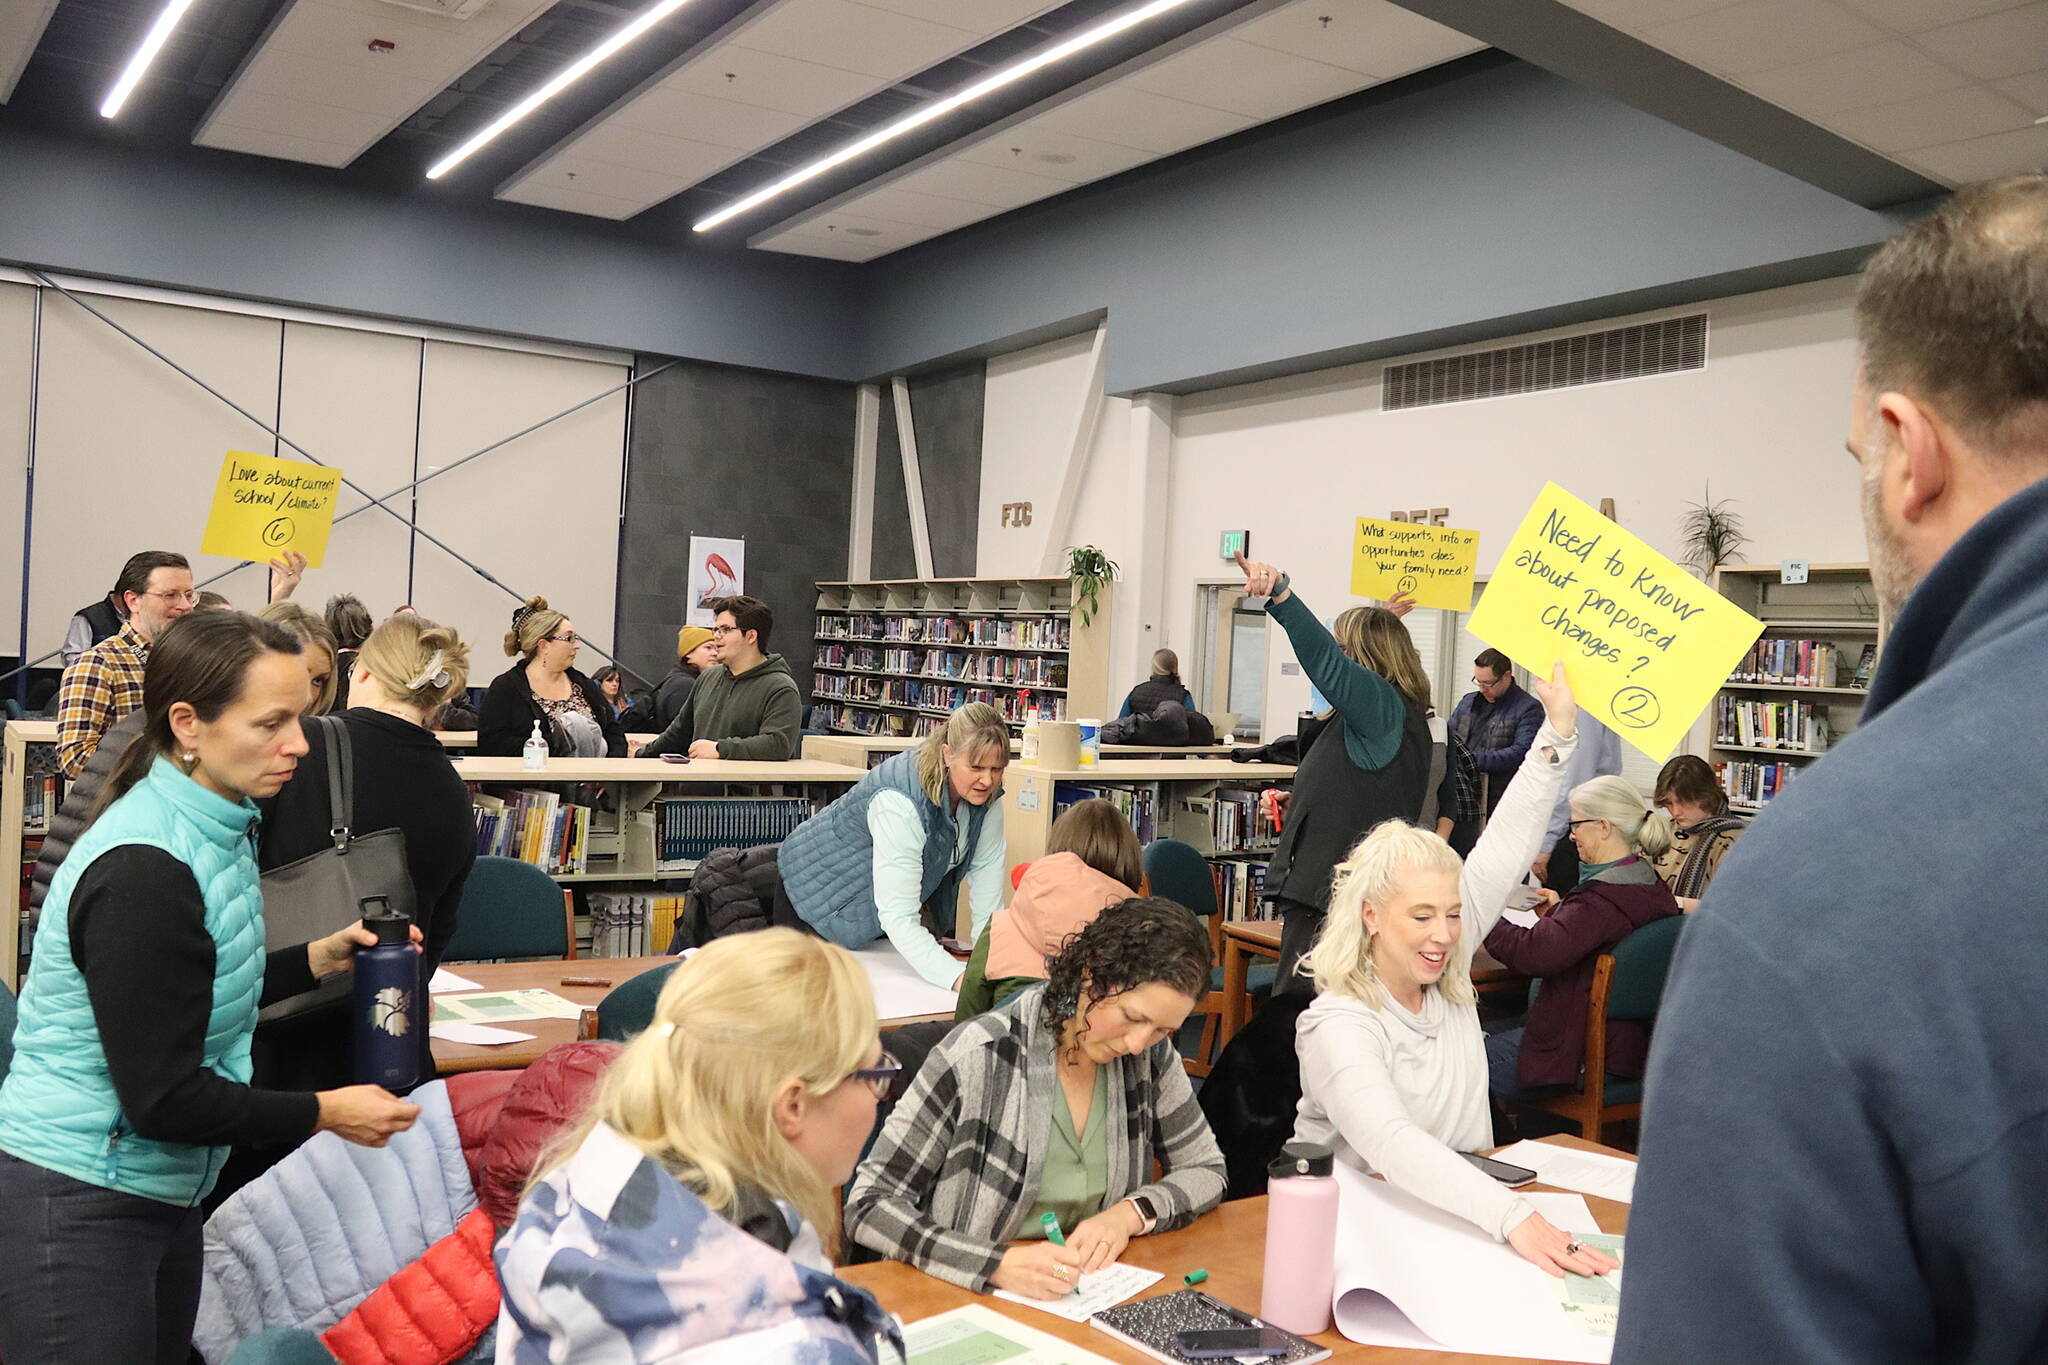 Juneau School District leaders hold up signs for subgroups they are leading during a Community Budget Input Session at Thunder Mountain High School on Wednesday night. (Mark Sabbatini / Juneau Empire)